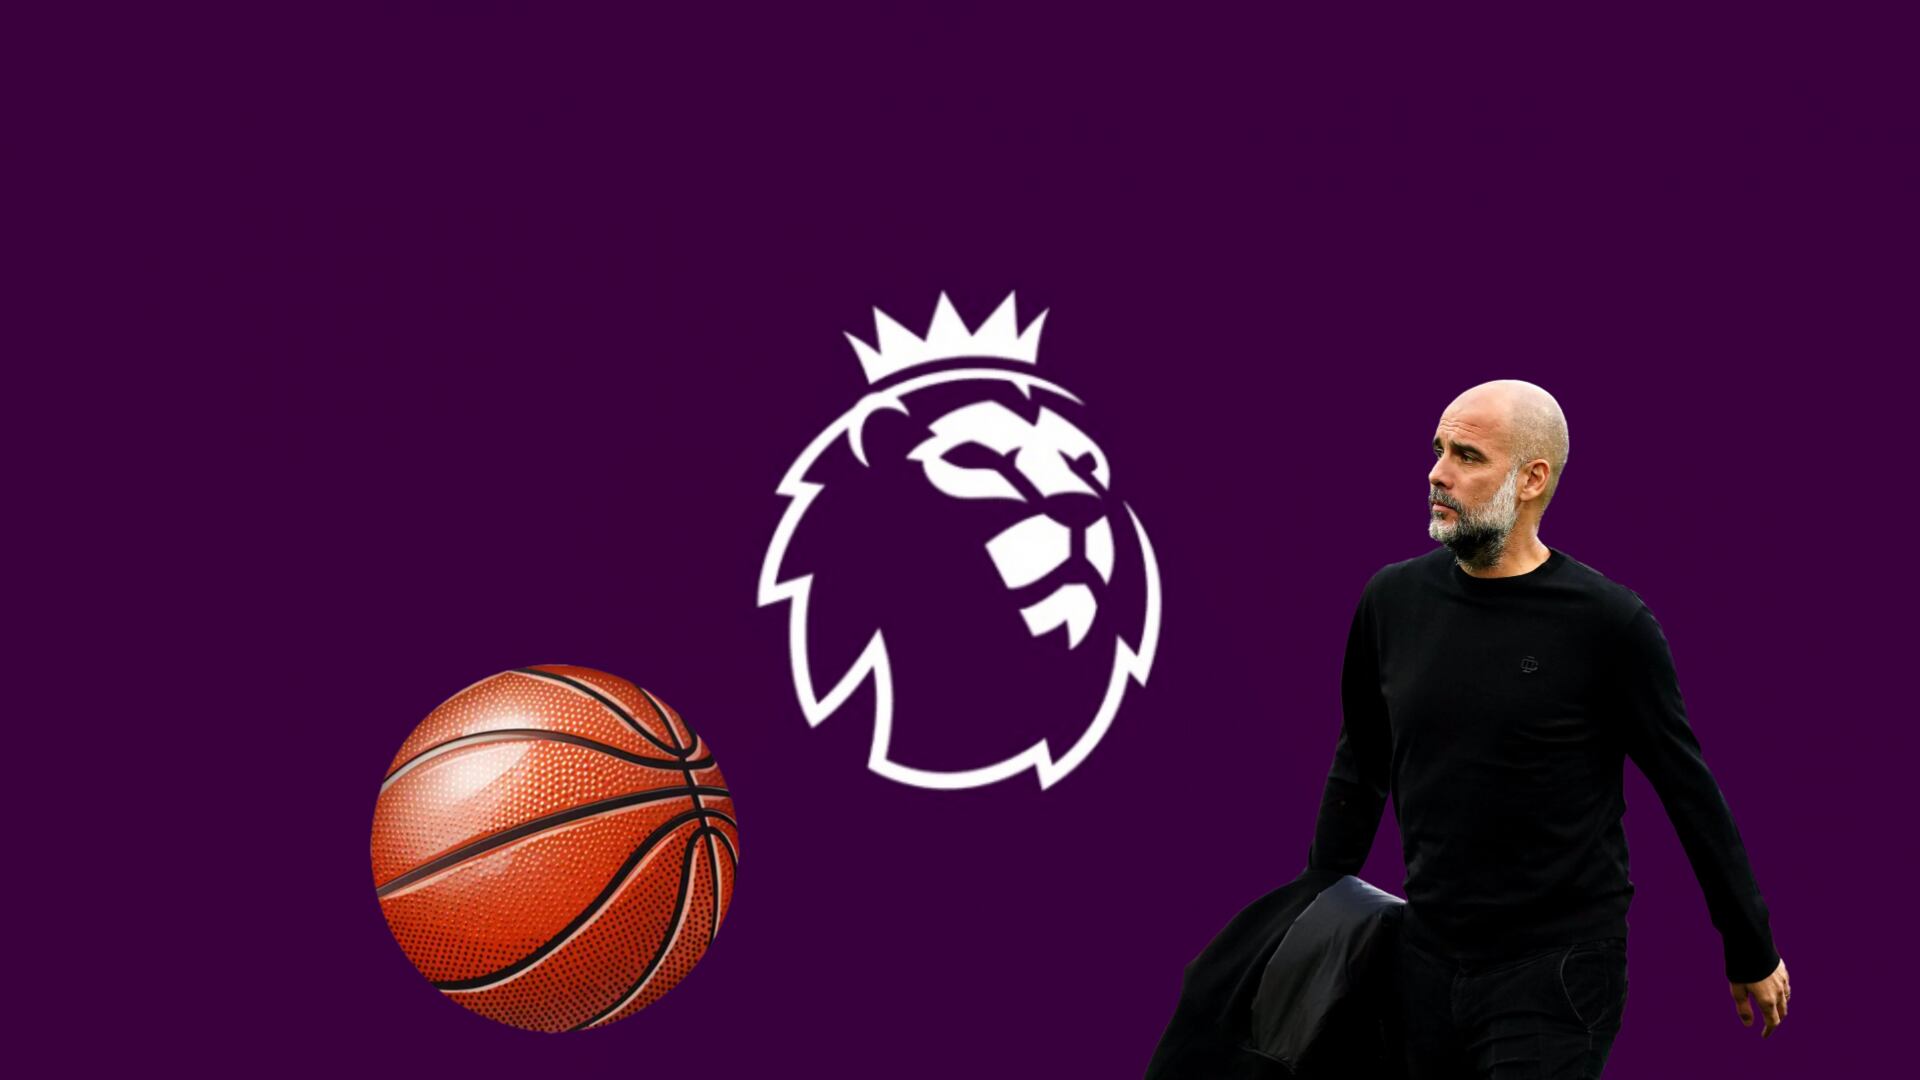 NBA rules in the Premier League? A rule that could benefit Guardiola's Man City